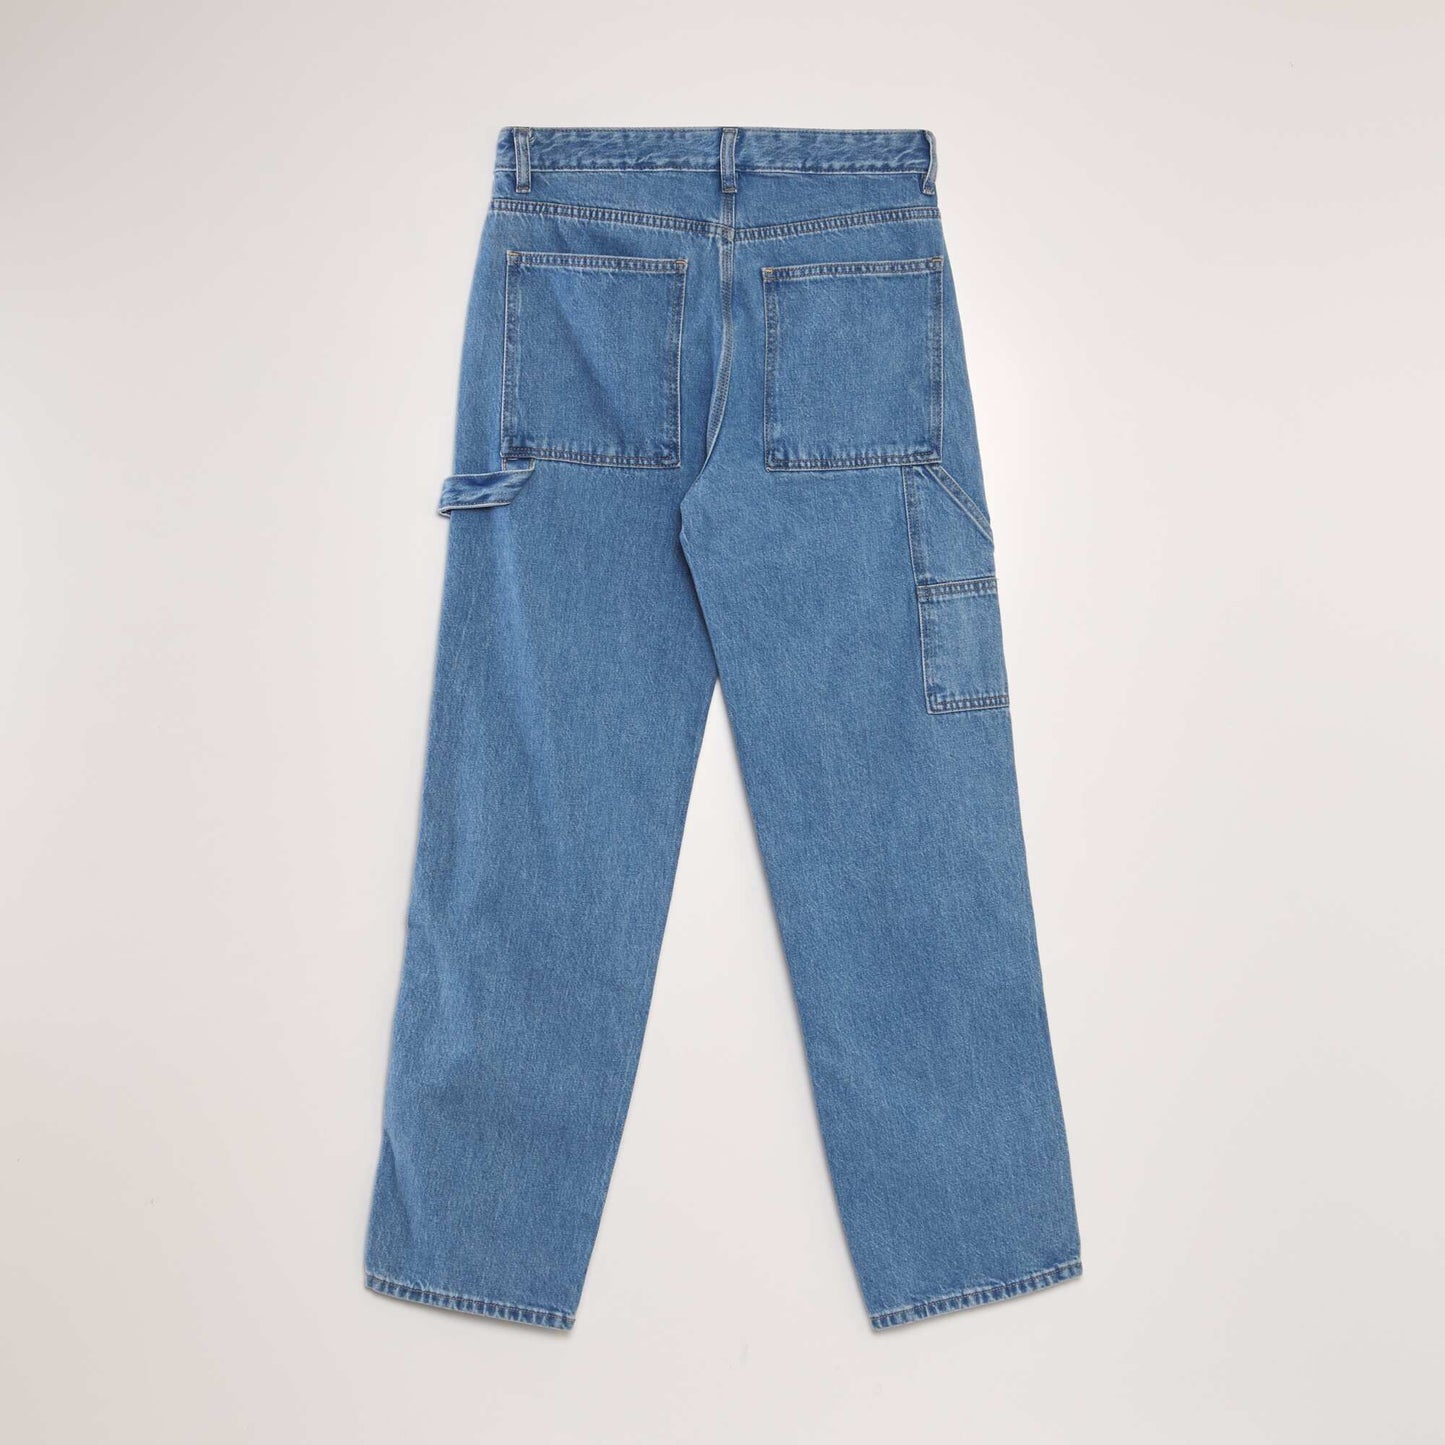 Jean relaxed fit carpenter Double stone